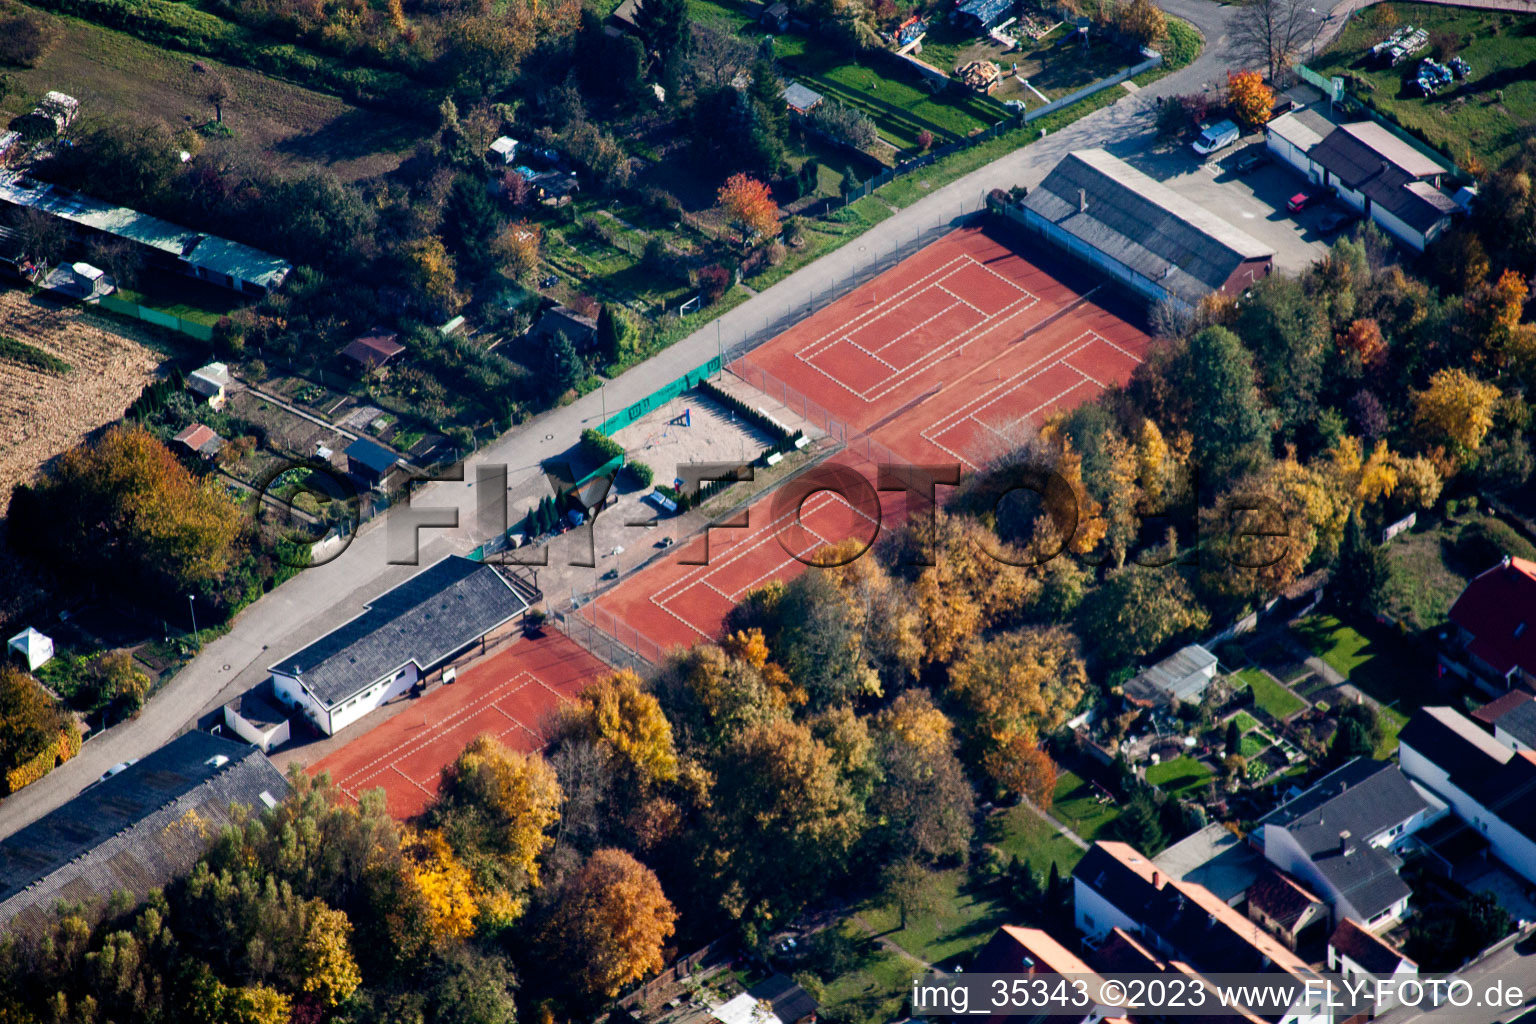 Aerial view of Tennis in Hagenbach in the state Rhineland-Palatinate, Germany